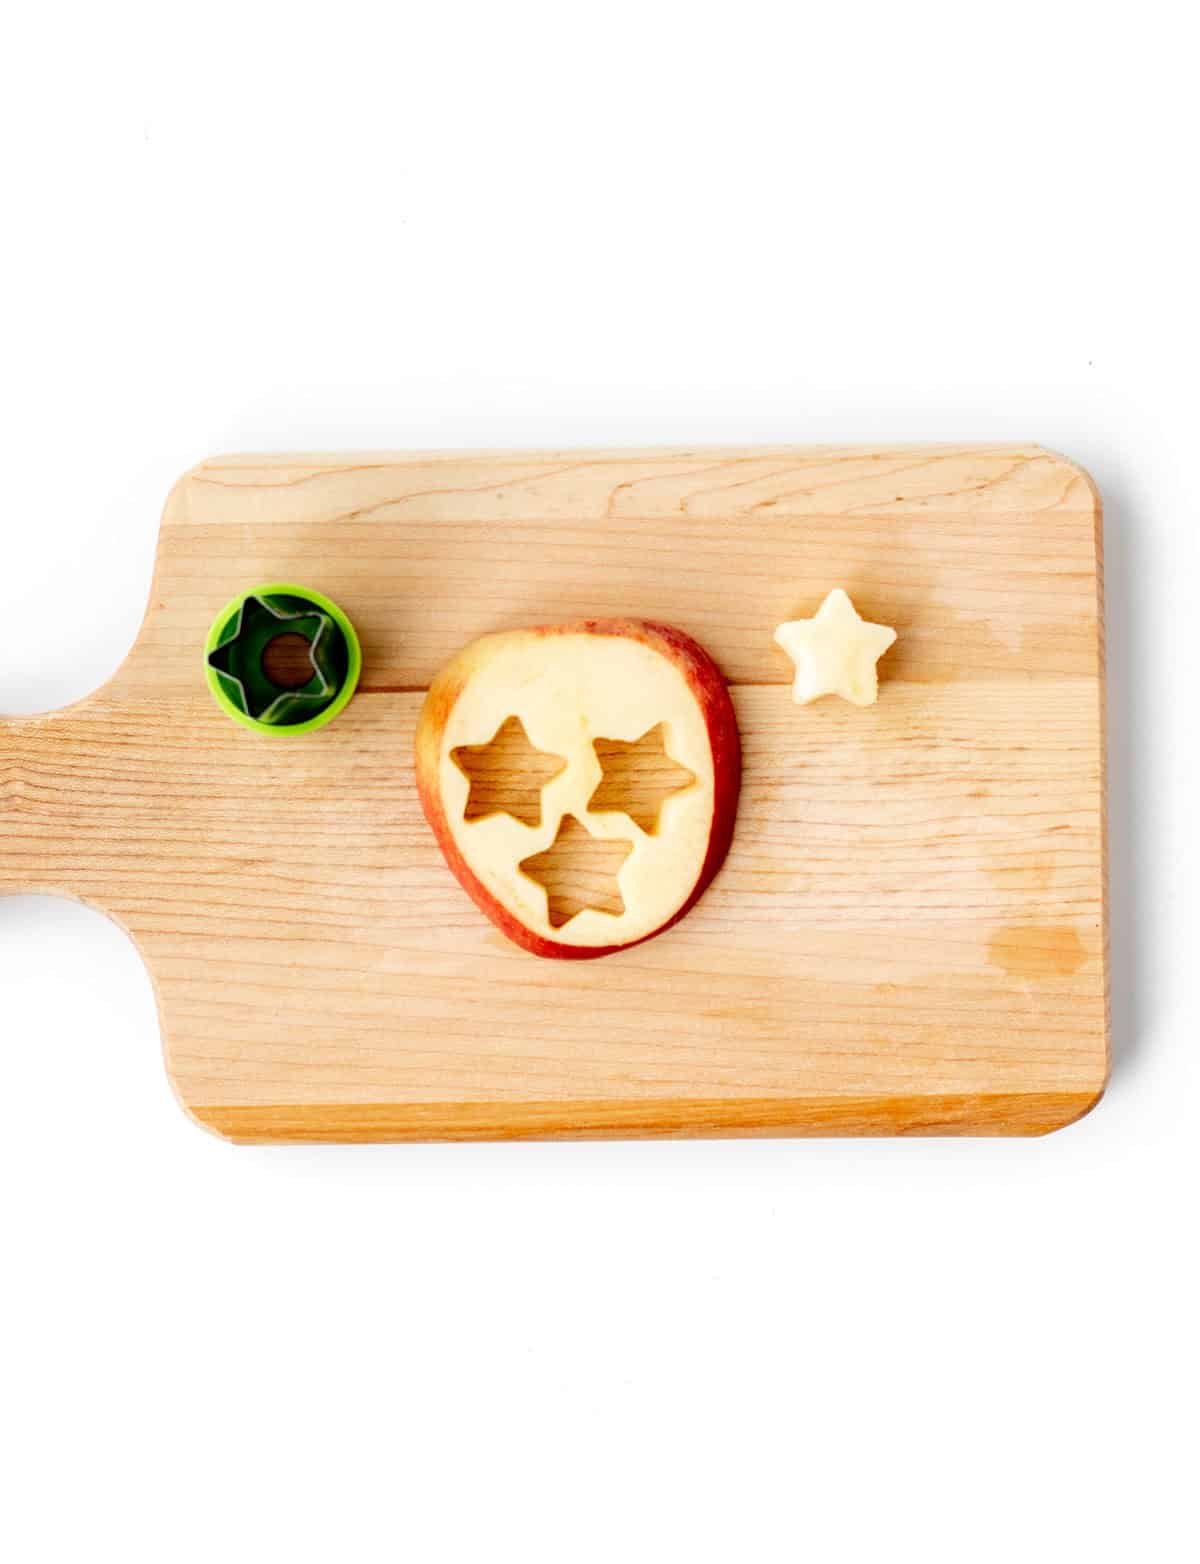 A star shaped cookie cutter on a wooden cutting board, with stars cut out of an apple.